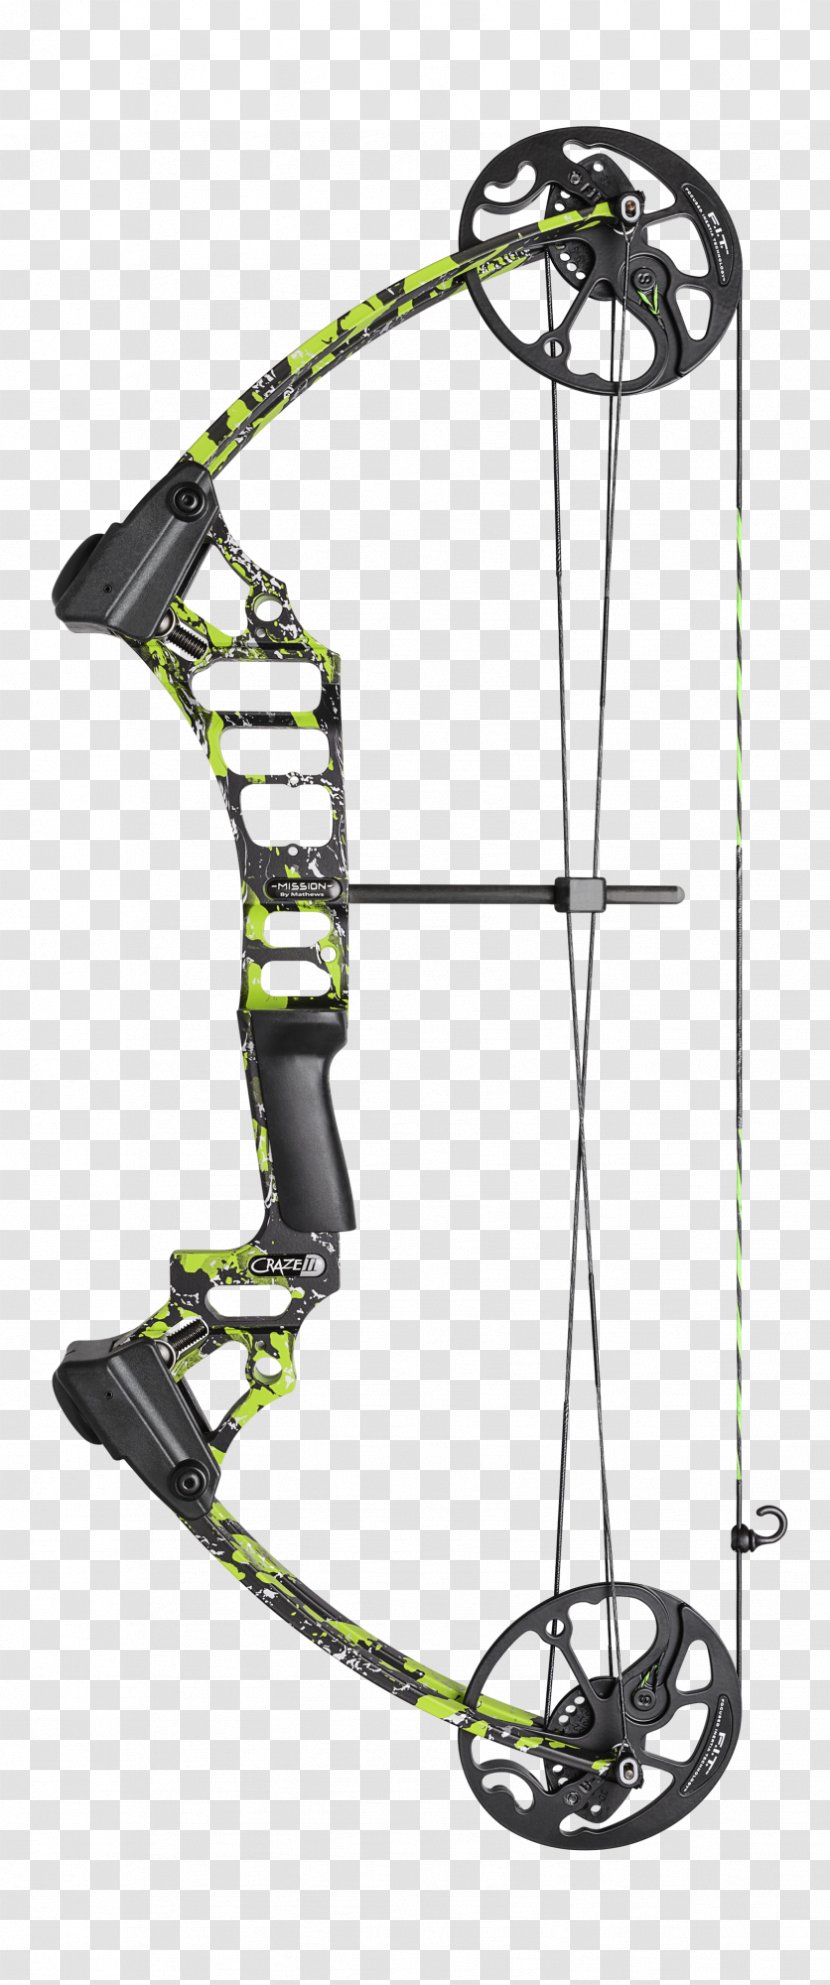 Compound Bows Bow And Arrow Archery Bowhunting - Sport - Web Shop Transparent PNG